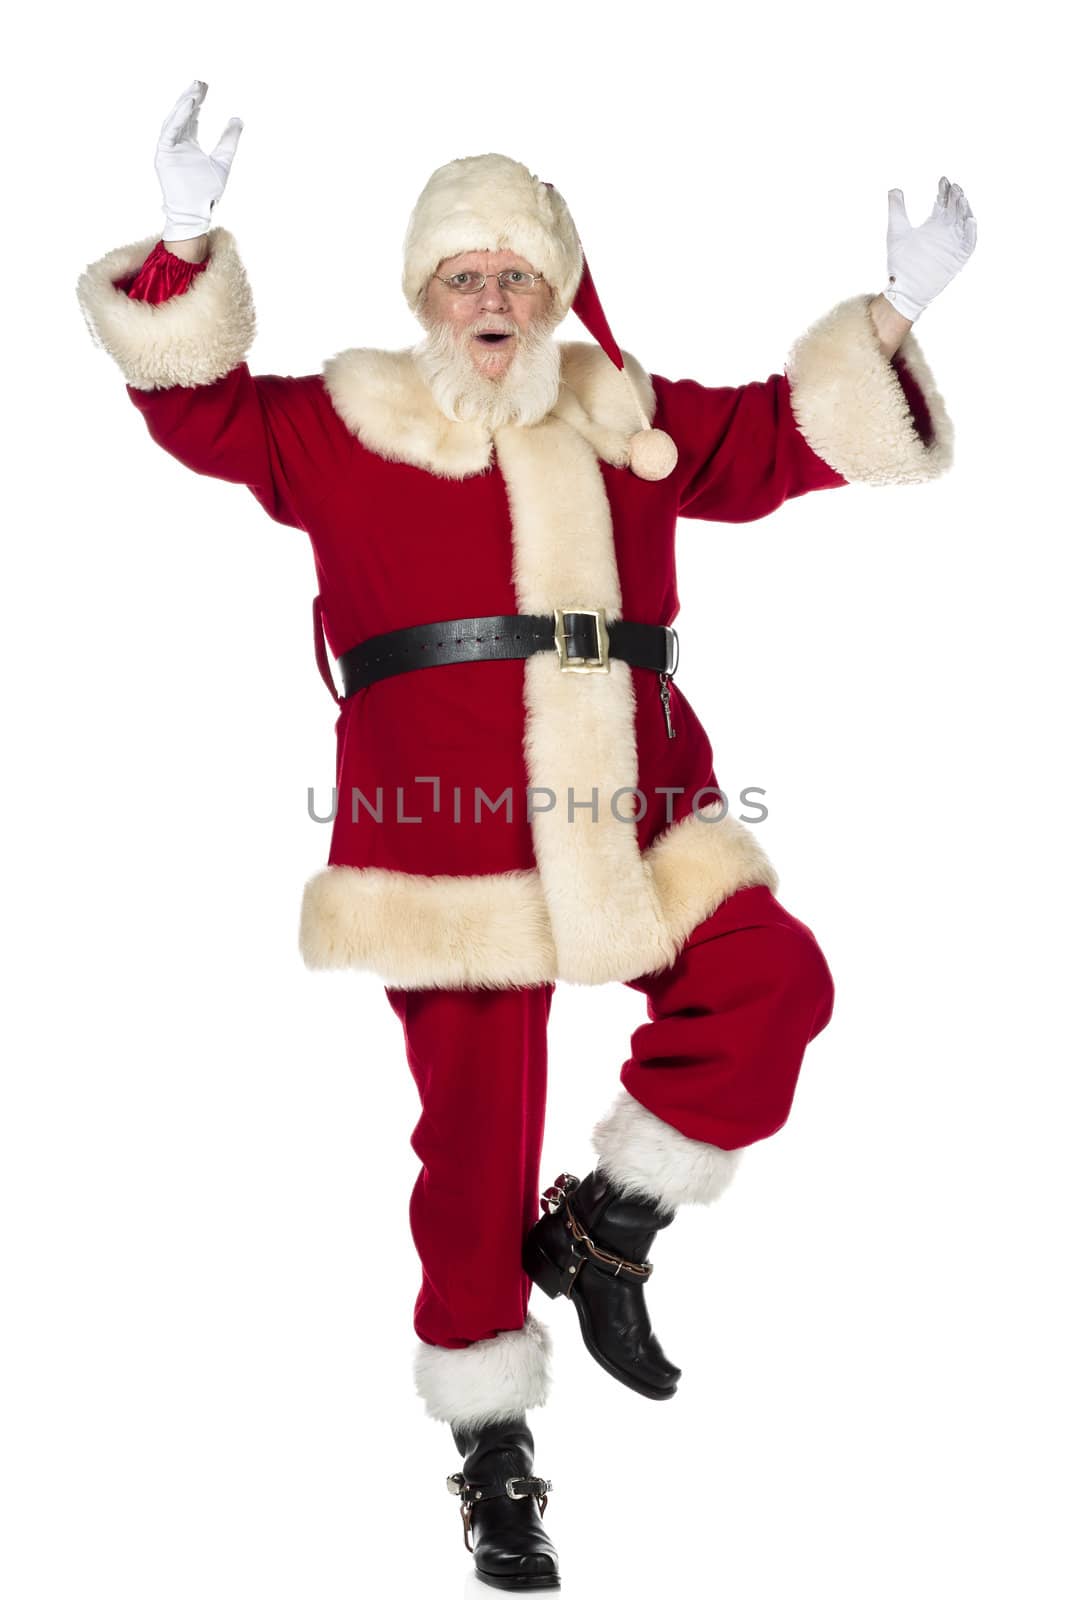 Close-up of Santa Claus dancing over white background